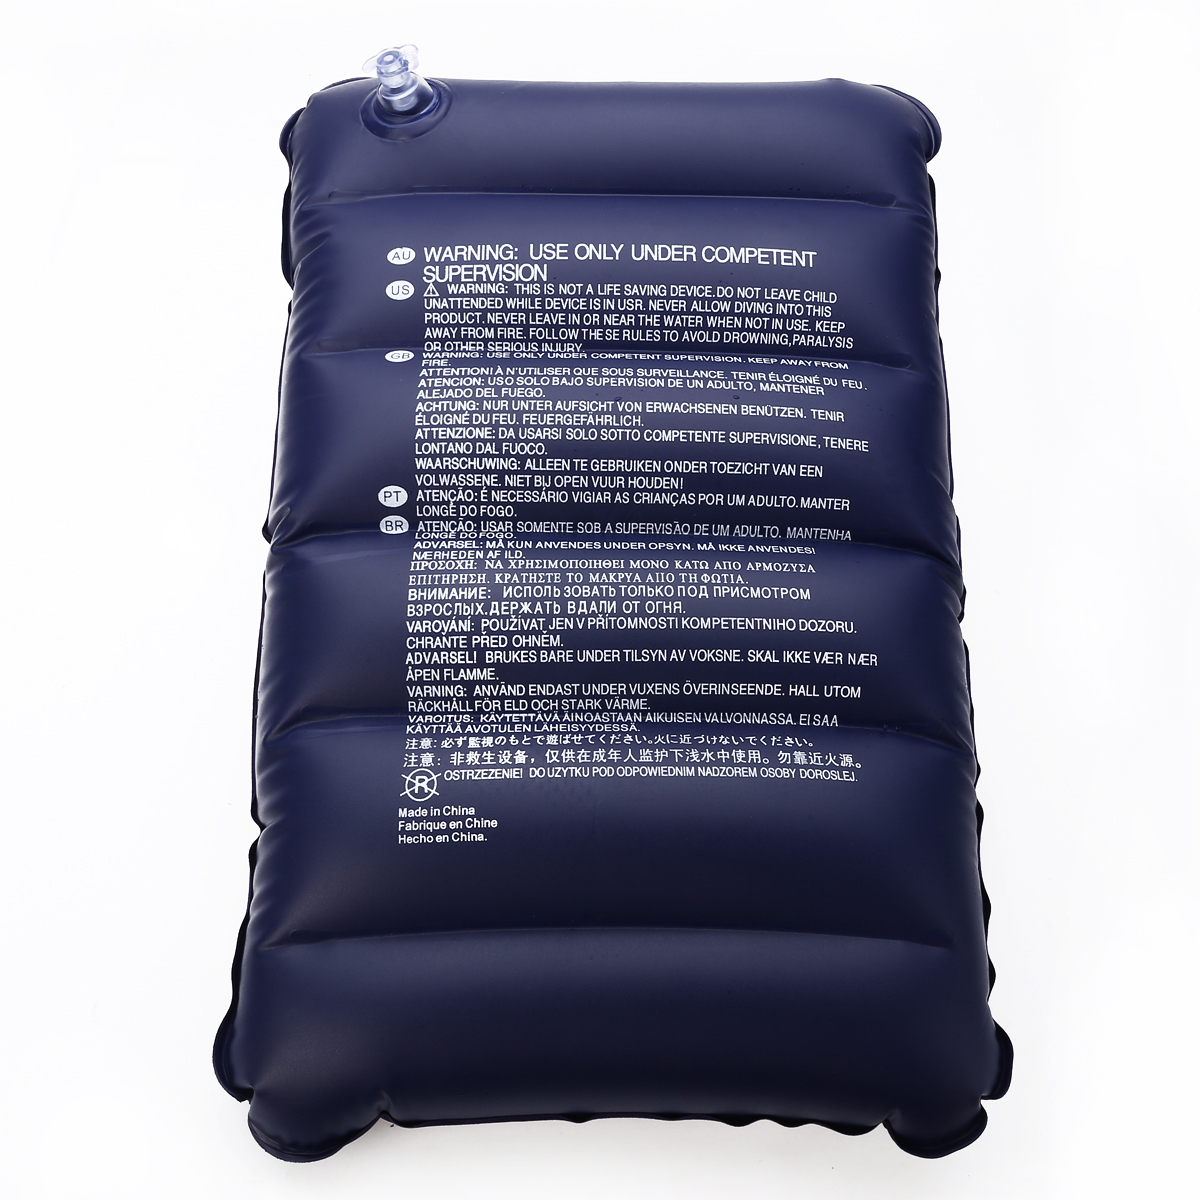 Outdoor 47x30cm Inflatable Pillow Travel Outdoor Comfortable Protect Head Neck Inflatable Air Pillow Cushion Camping Mat New